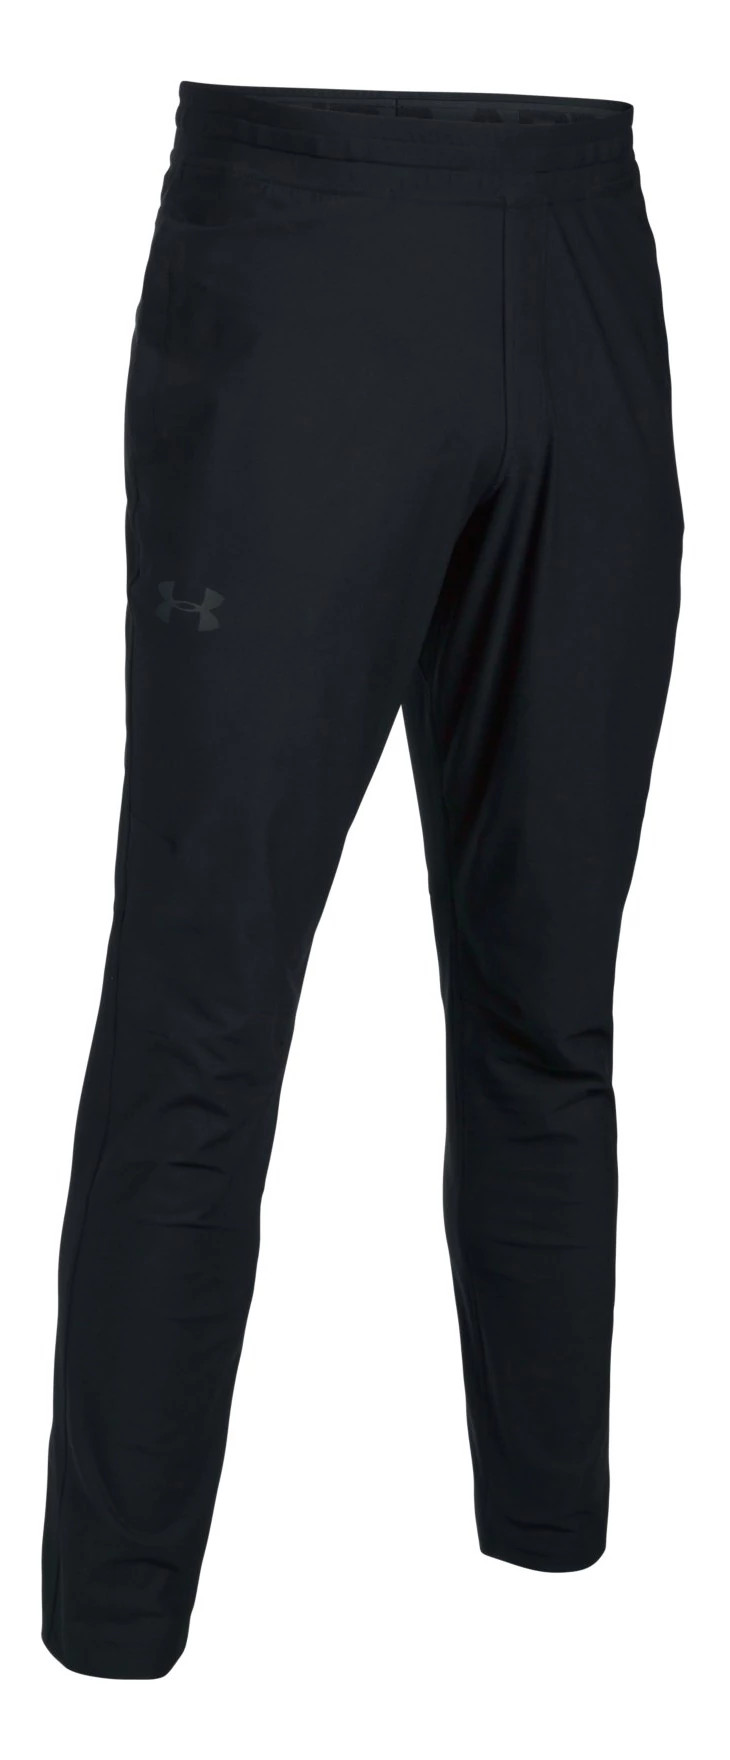 Mens Under Armour Elevated Knit Pants